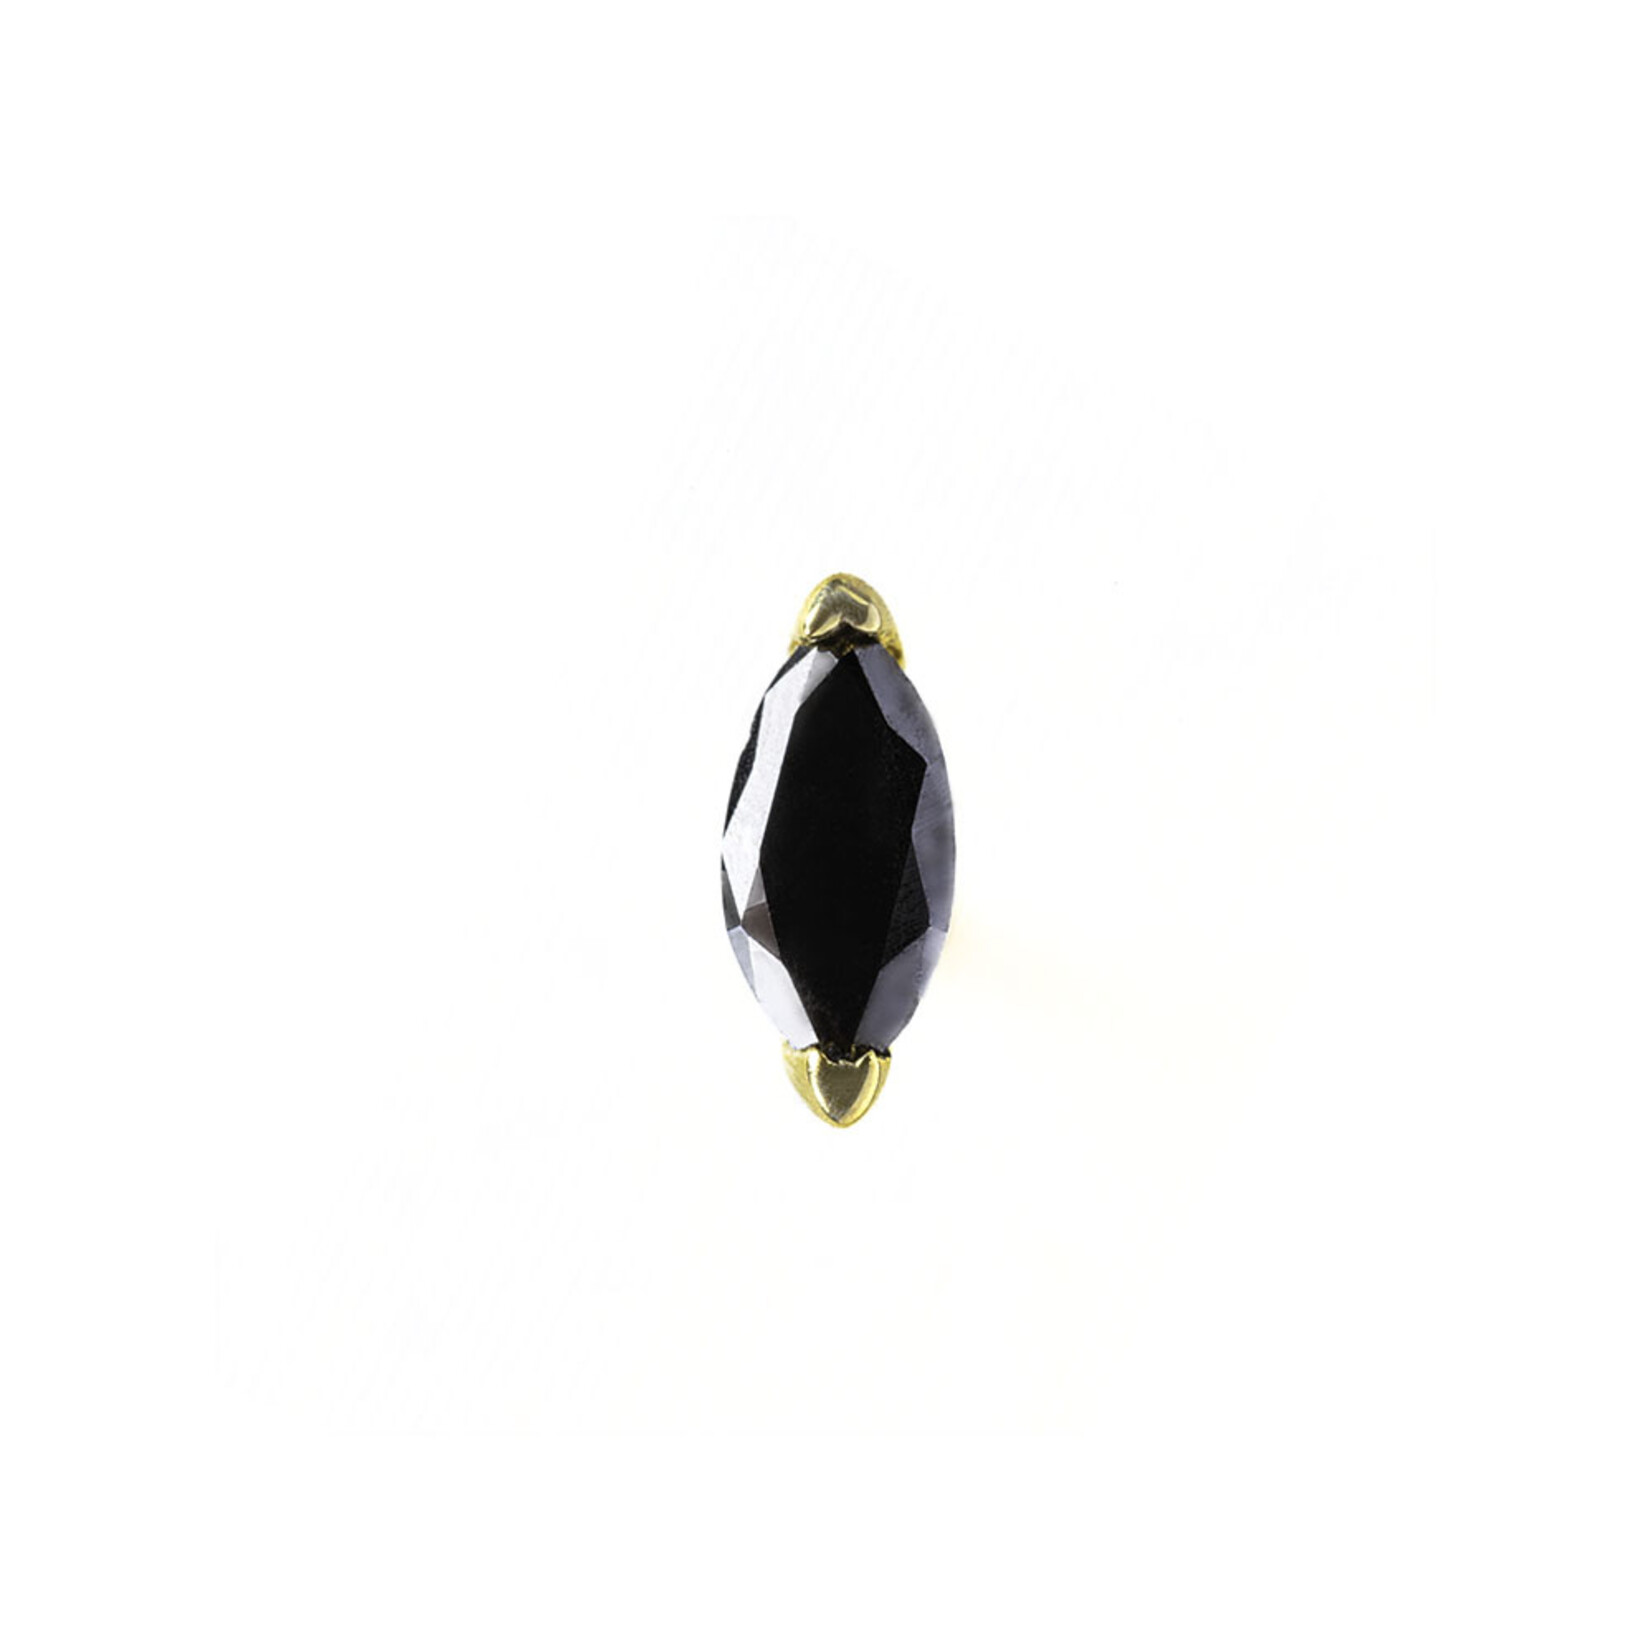 BVLA BVLA "V-Prong Marquise" press fit end with 3x1.5 black diamond